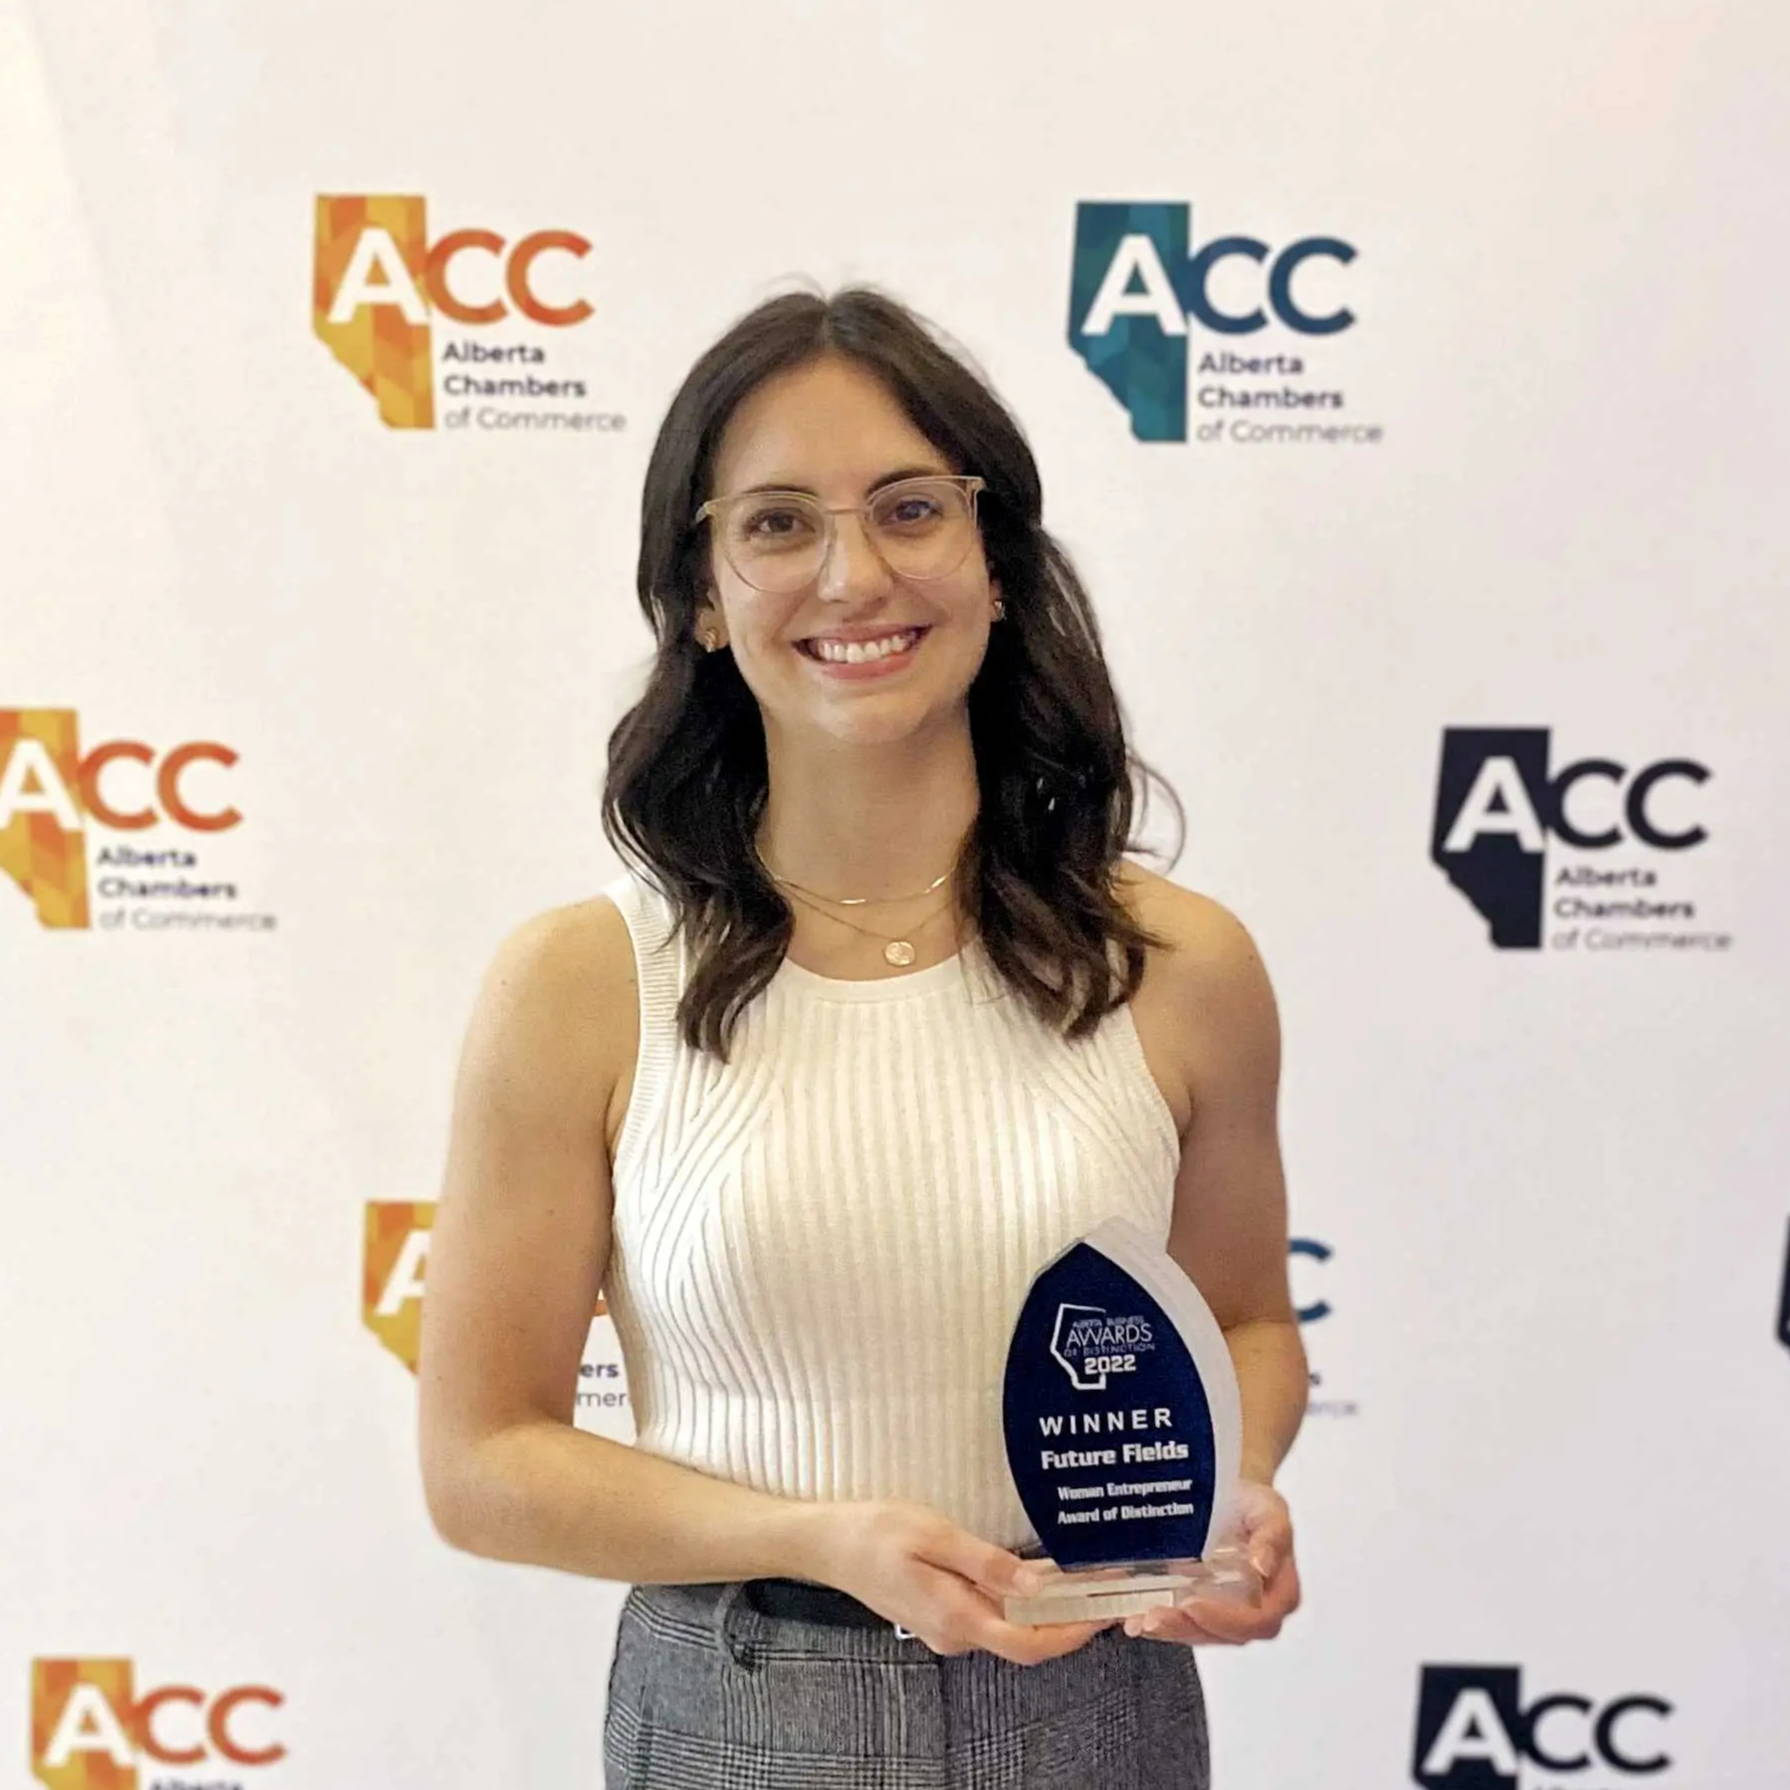 Jalene Anderson-Baron wins Alberta Woman Entrepreneur Award of Distinction for 2022.  Jalene stands in front of an ACC backdrop holding an award.